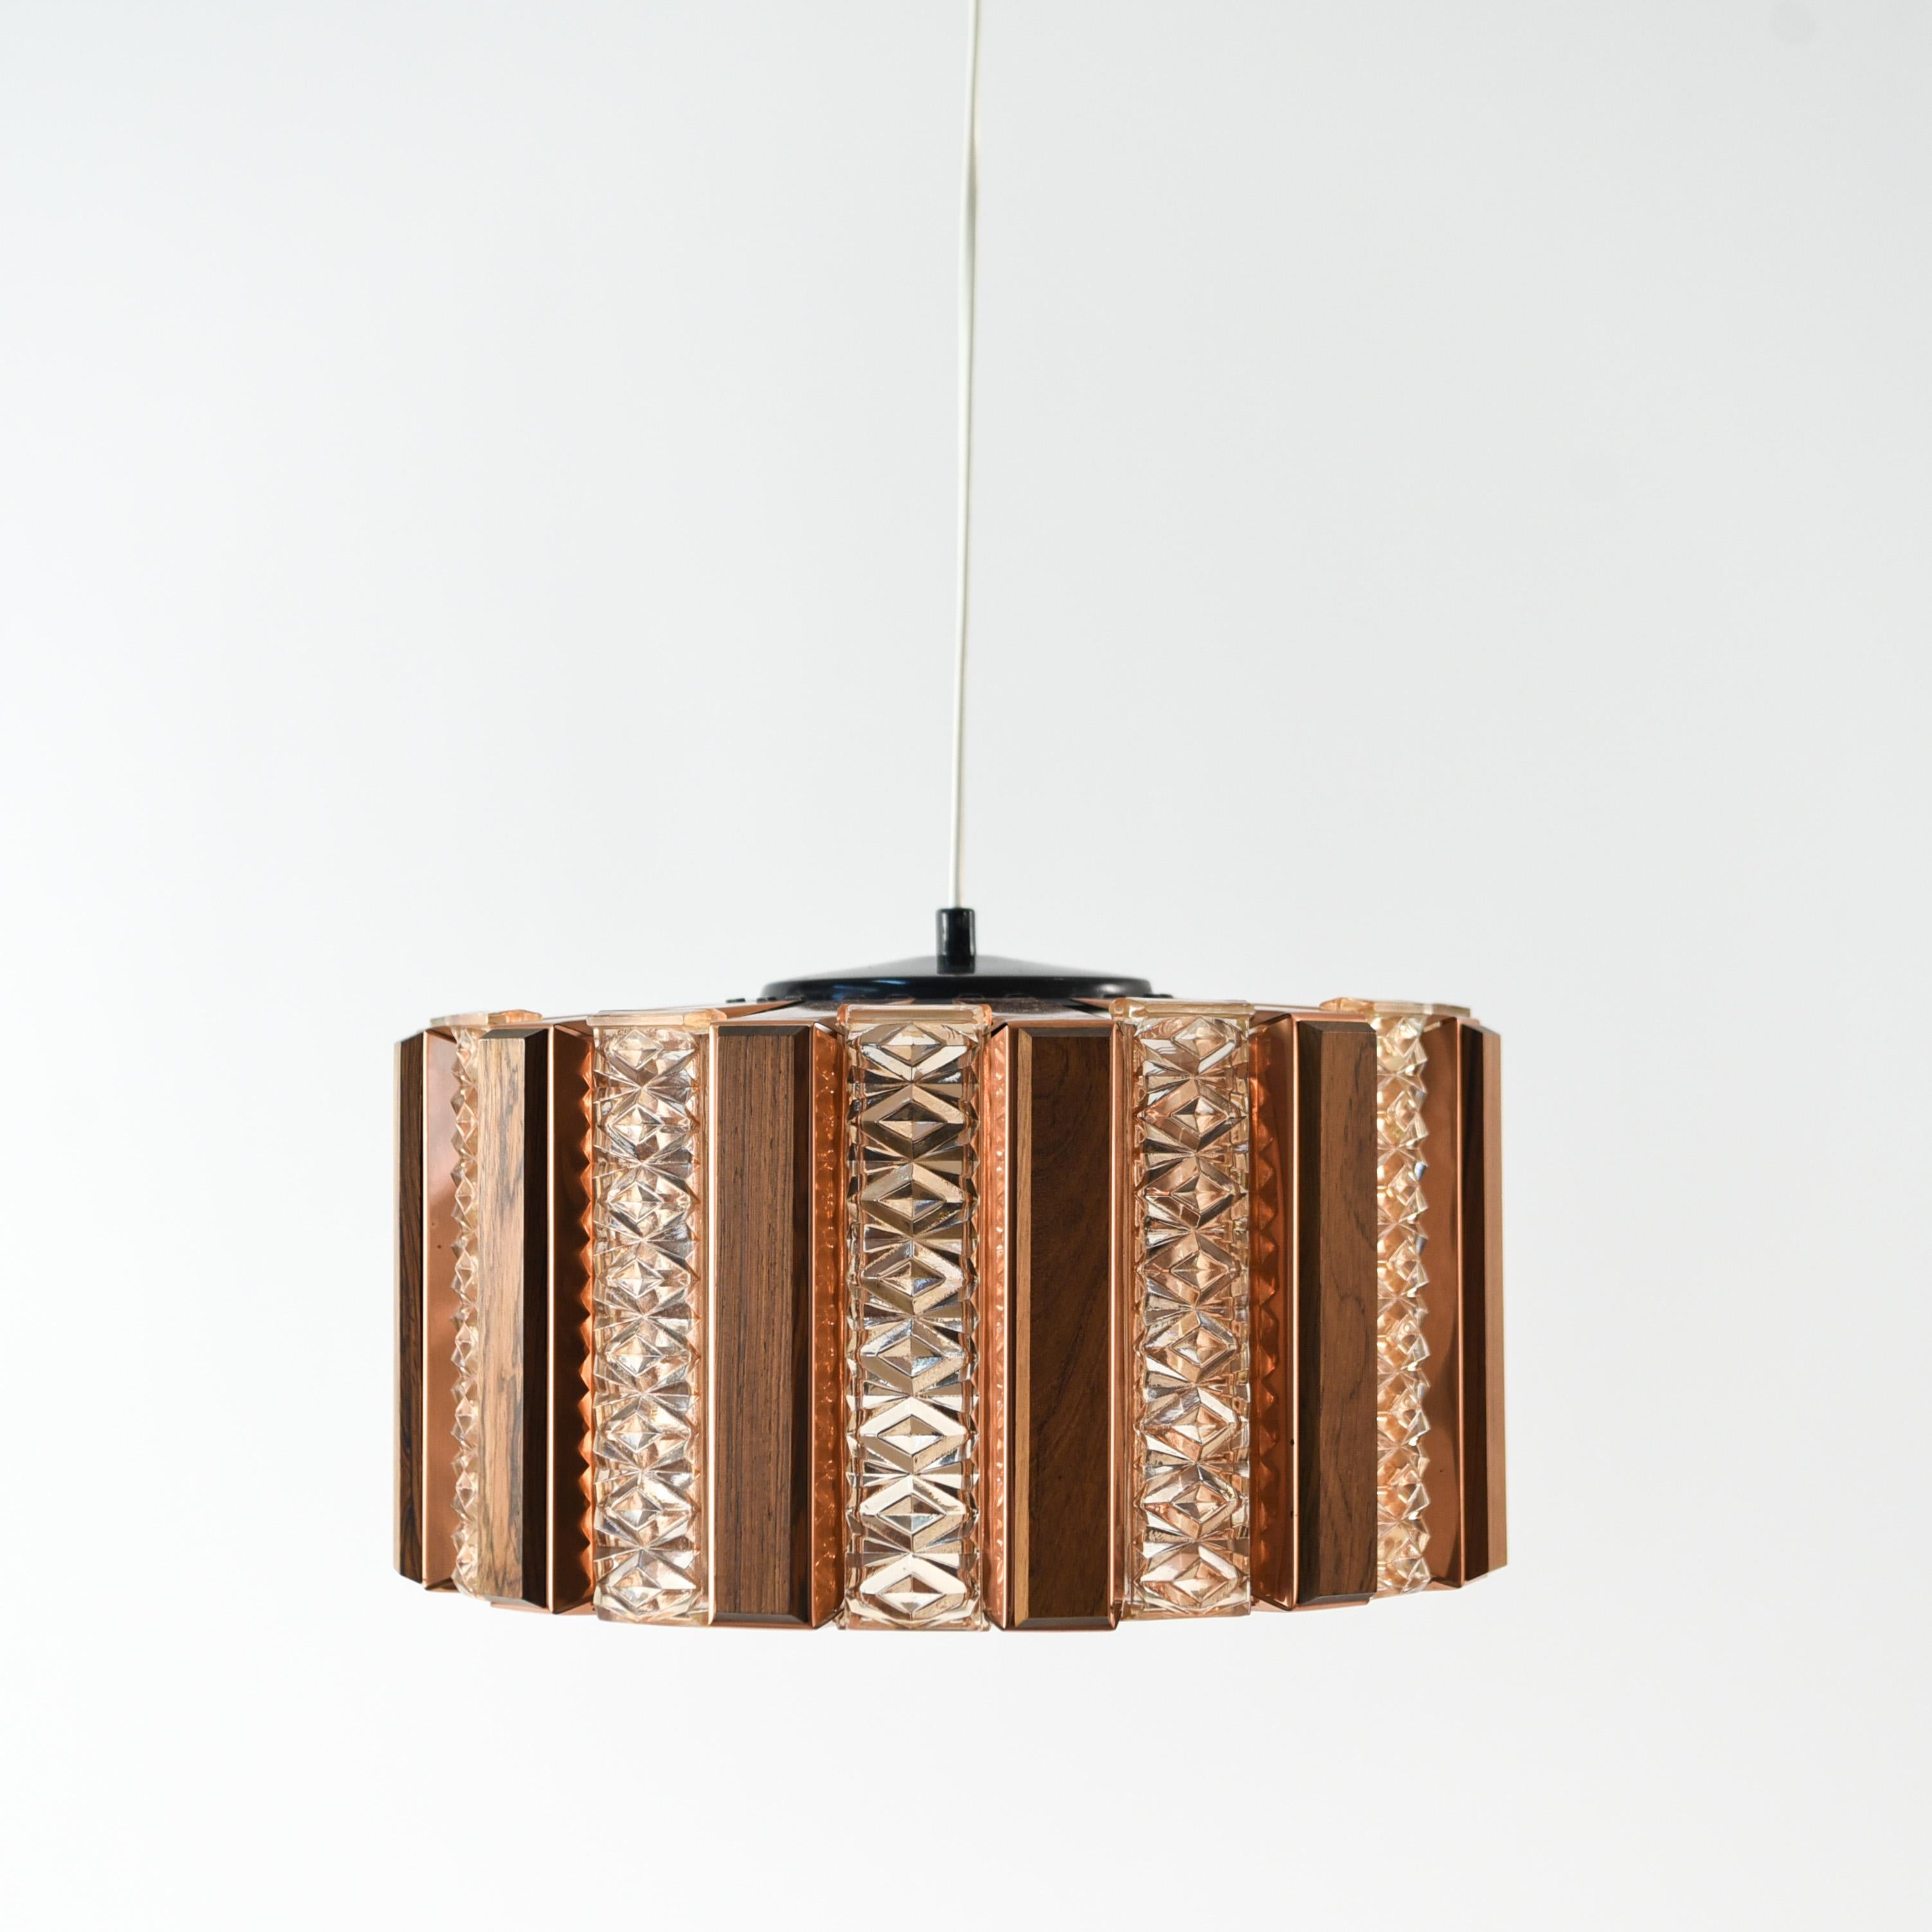 This rare chandelier was designed by Verner Schou for Coronell Elektro and features panels of Orrefors glass amidst the typical copper which adds to its unusual quality.